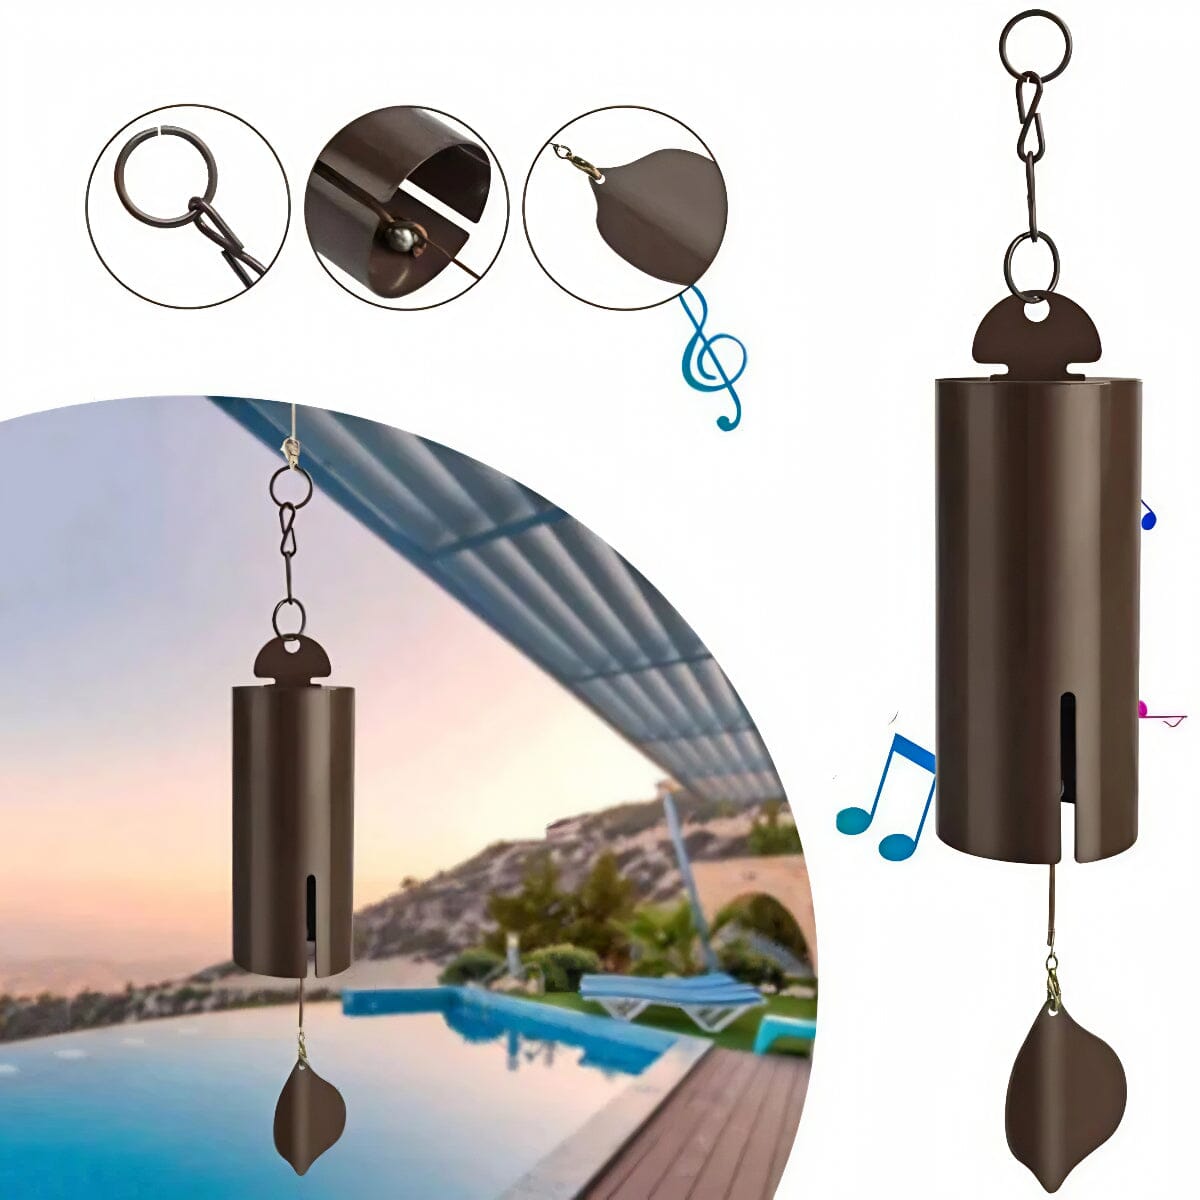 GoodVybe™ 16" Serenity Bell Wind Chime: Metal Garden Hanging Decor wind chime GoodVybe™ 